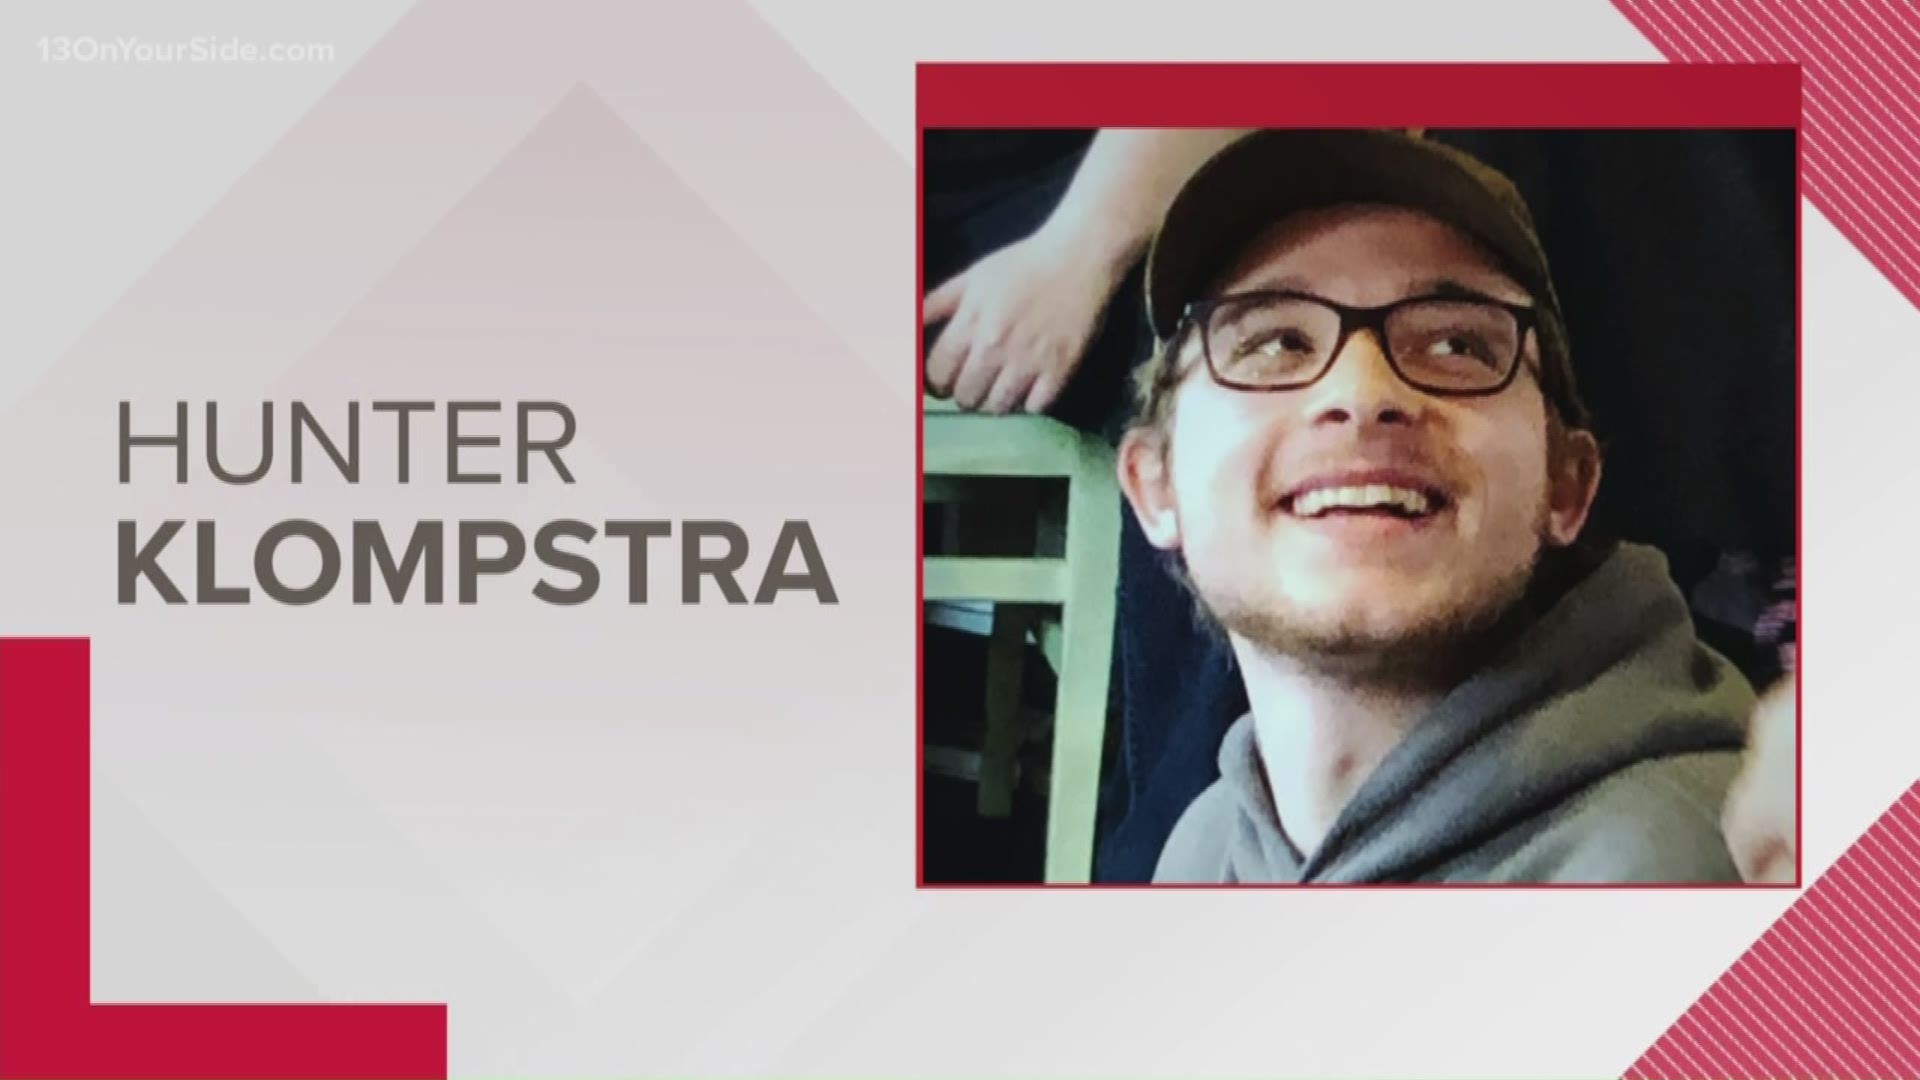 Hunter Klompstra has been missing since about 2 a.m. on Wednesday, Jan. 1.